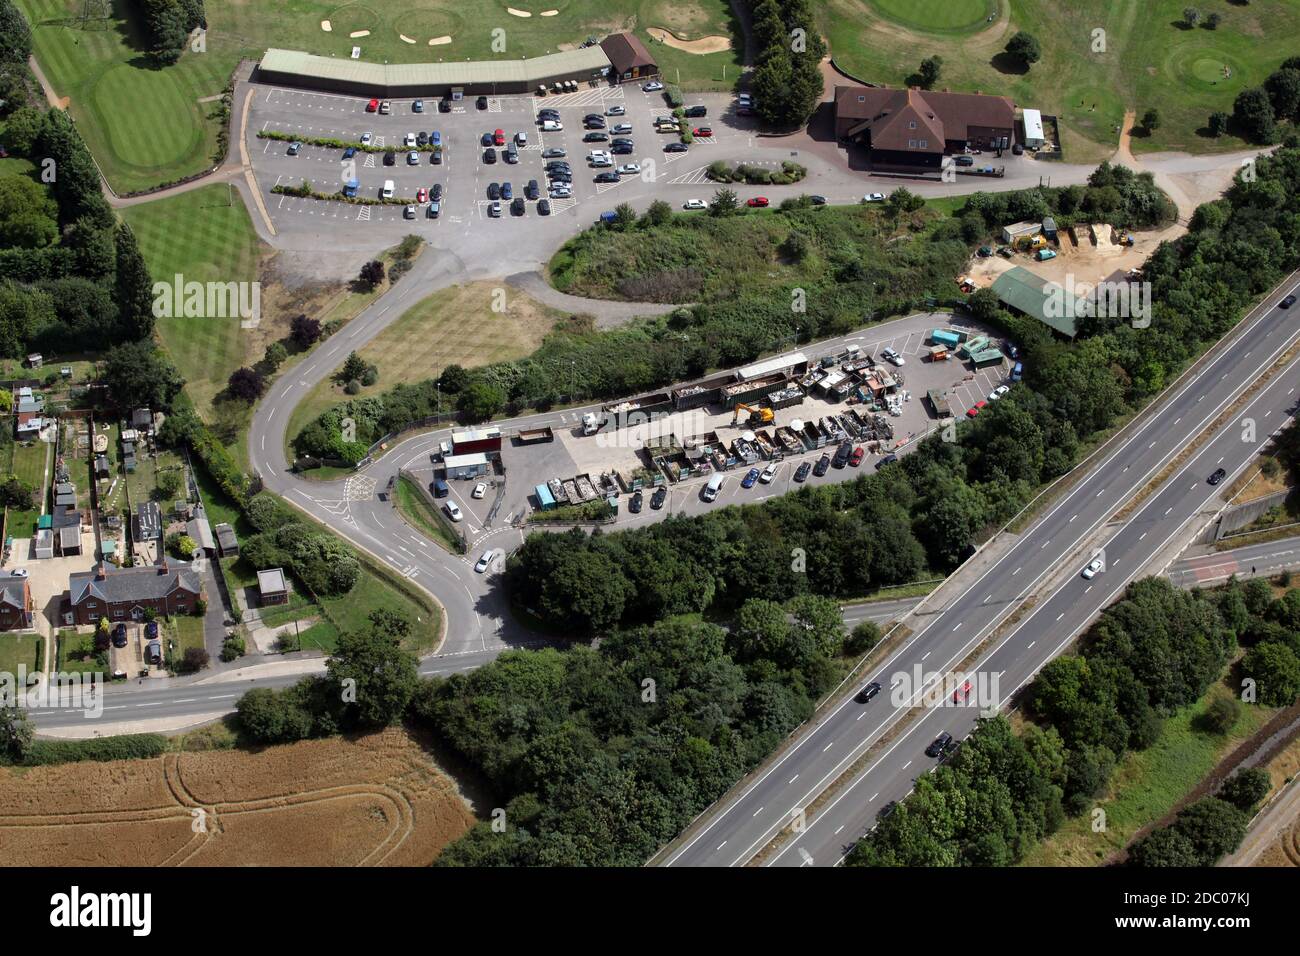 aerial view of Drayton Waste and Recycling Centre, and the Jonathan Draycott Golf Academy within Drayton Park Golf Club, Abingdon, Oxfordshire, UK Stock Photo